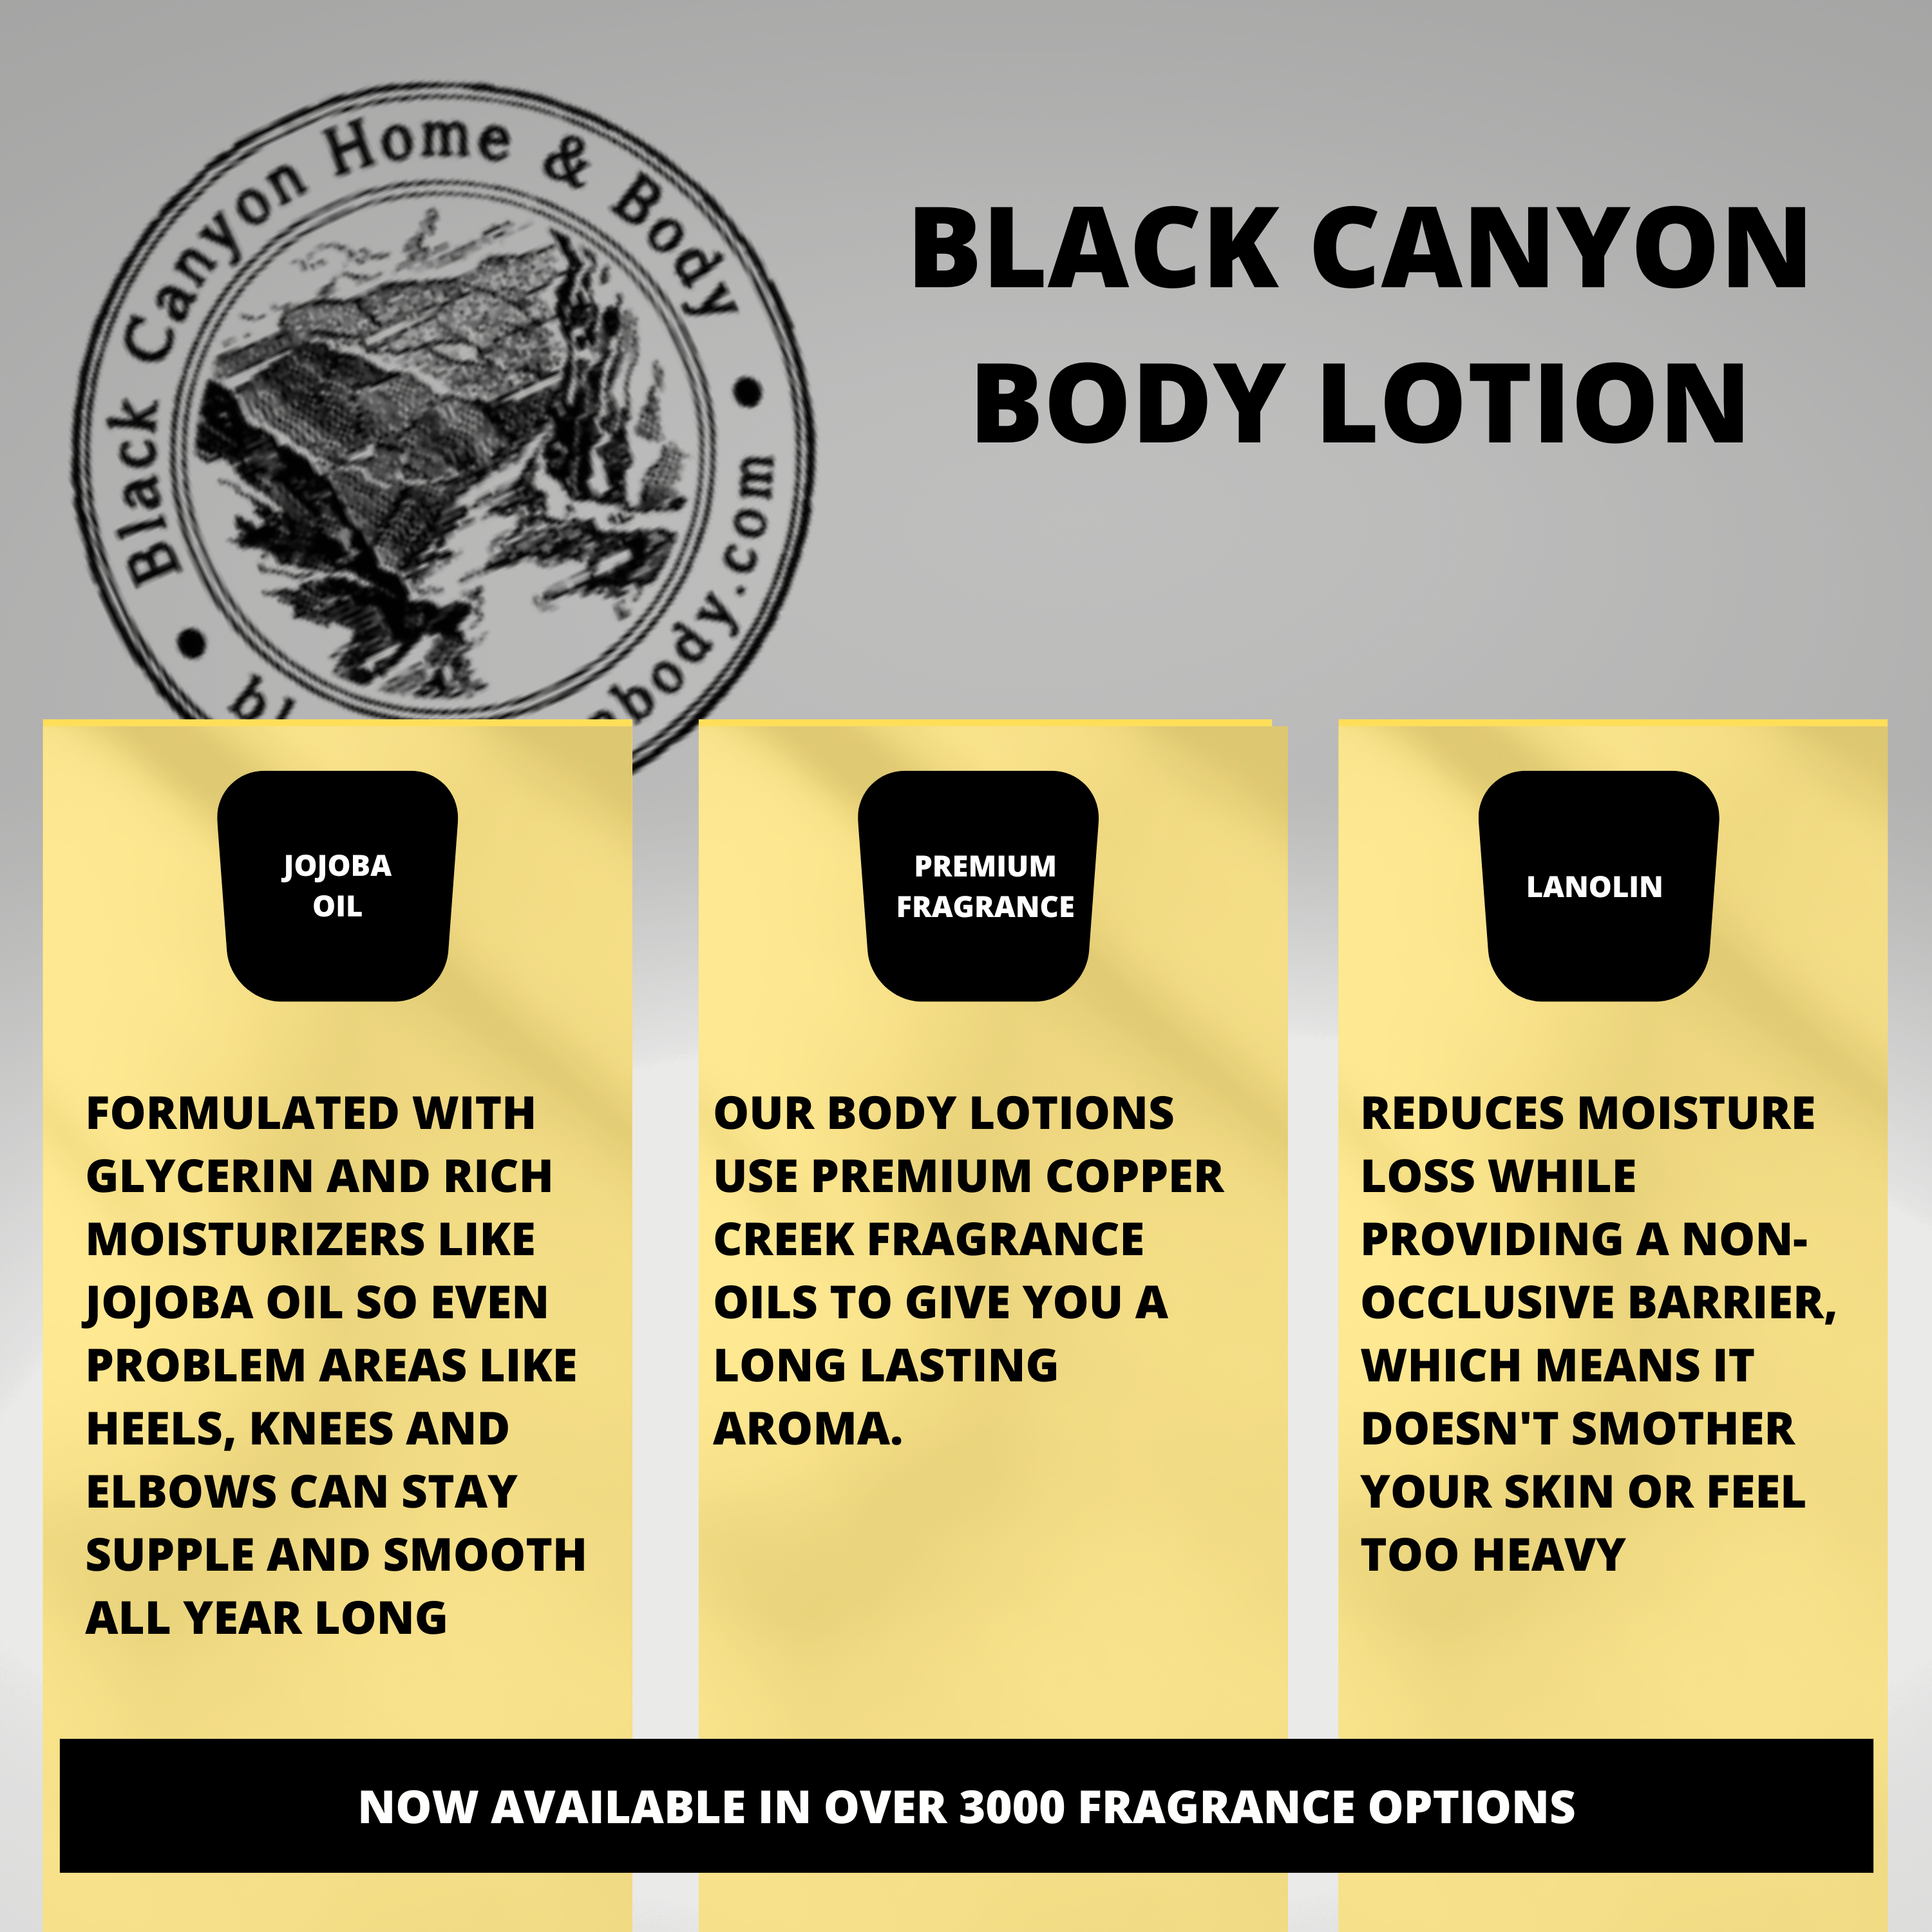 Black Canyon Caramel Coffee Scented Luxury Body Lotion with Lanolin and Jojoba Oil